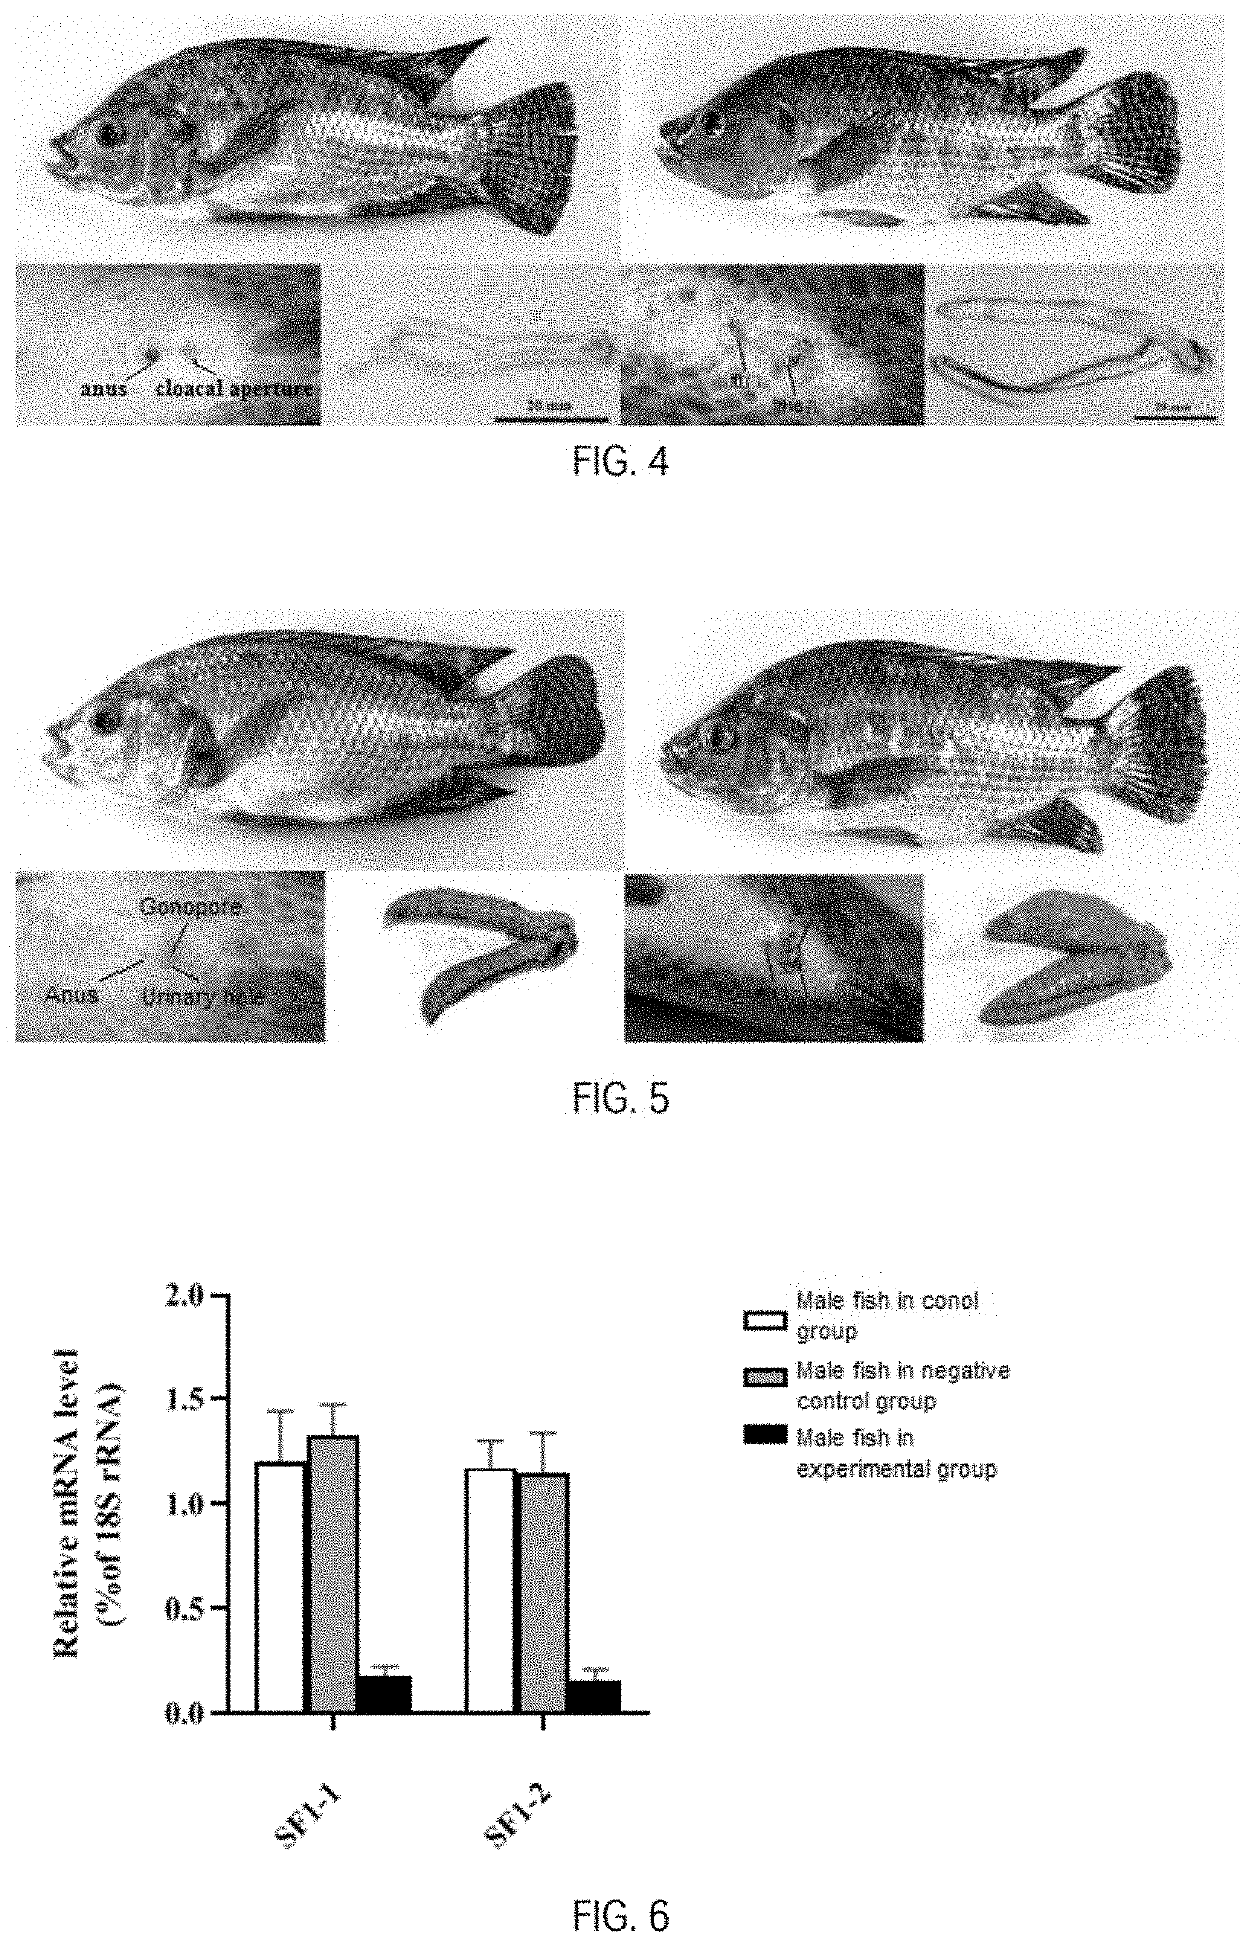 Combination of antisense RNA sequences and use in the production of abortive tilapia